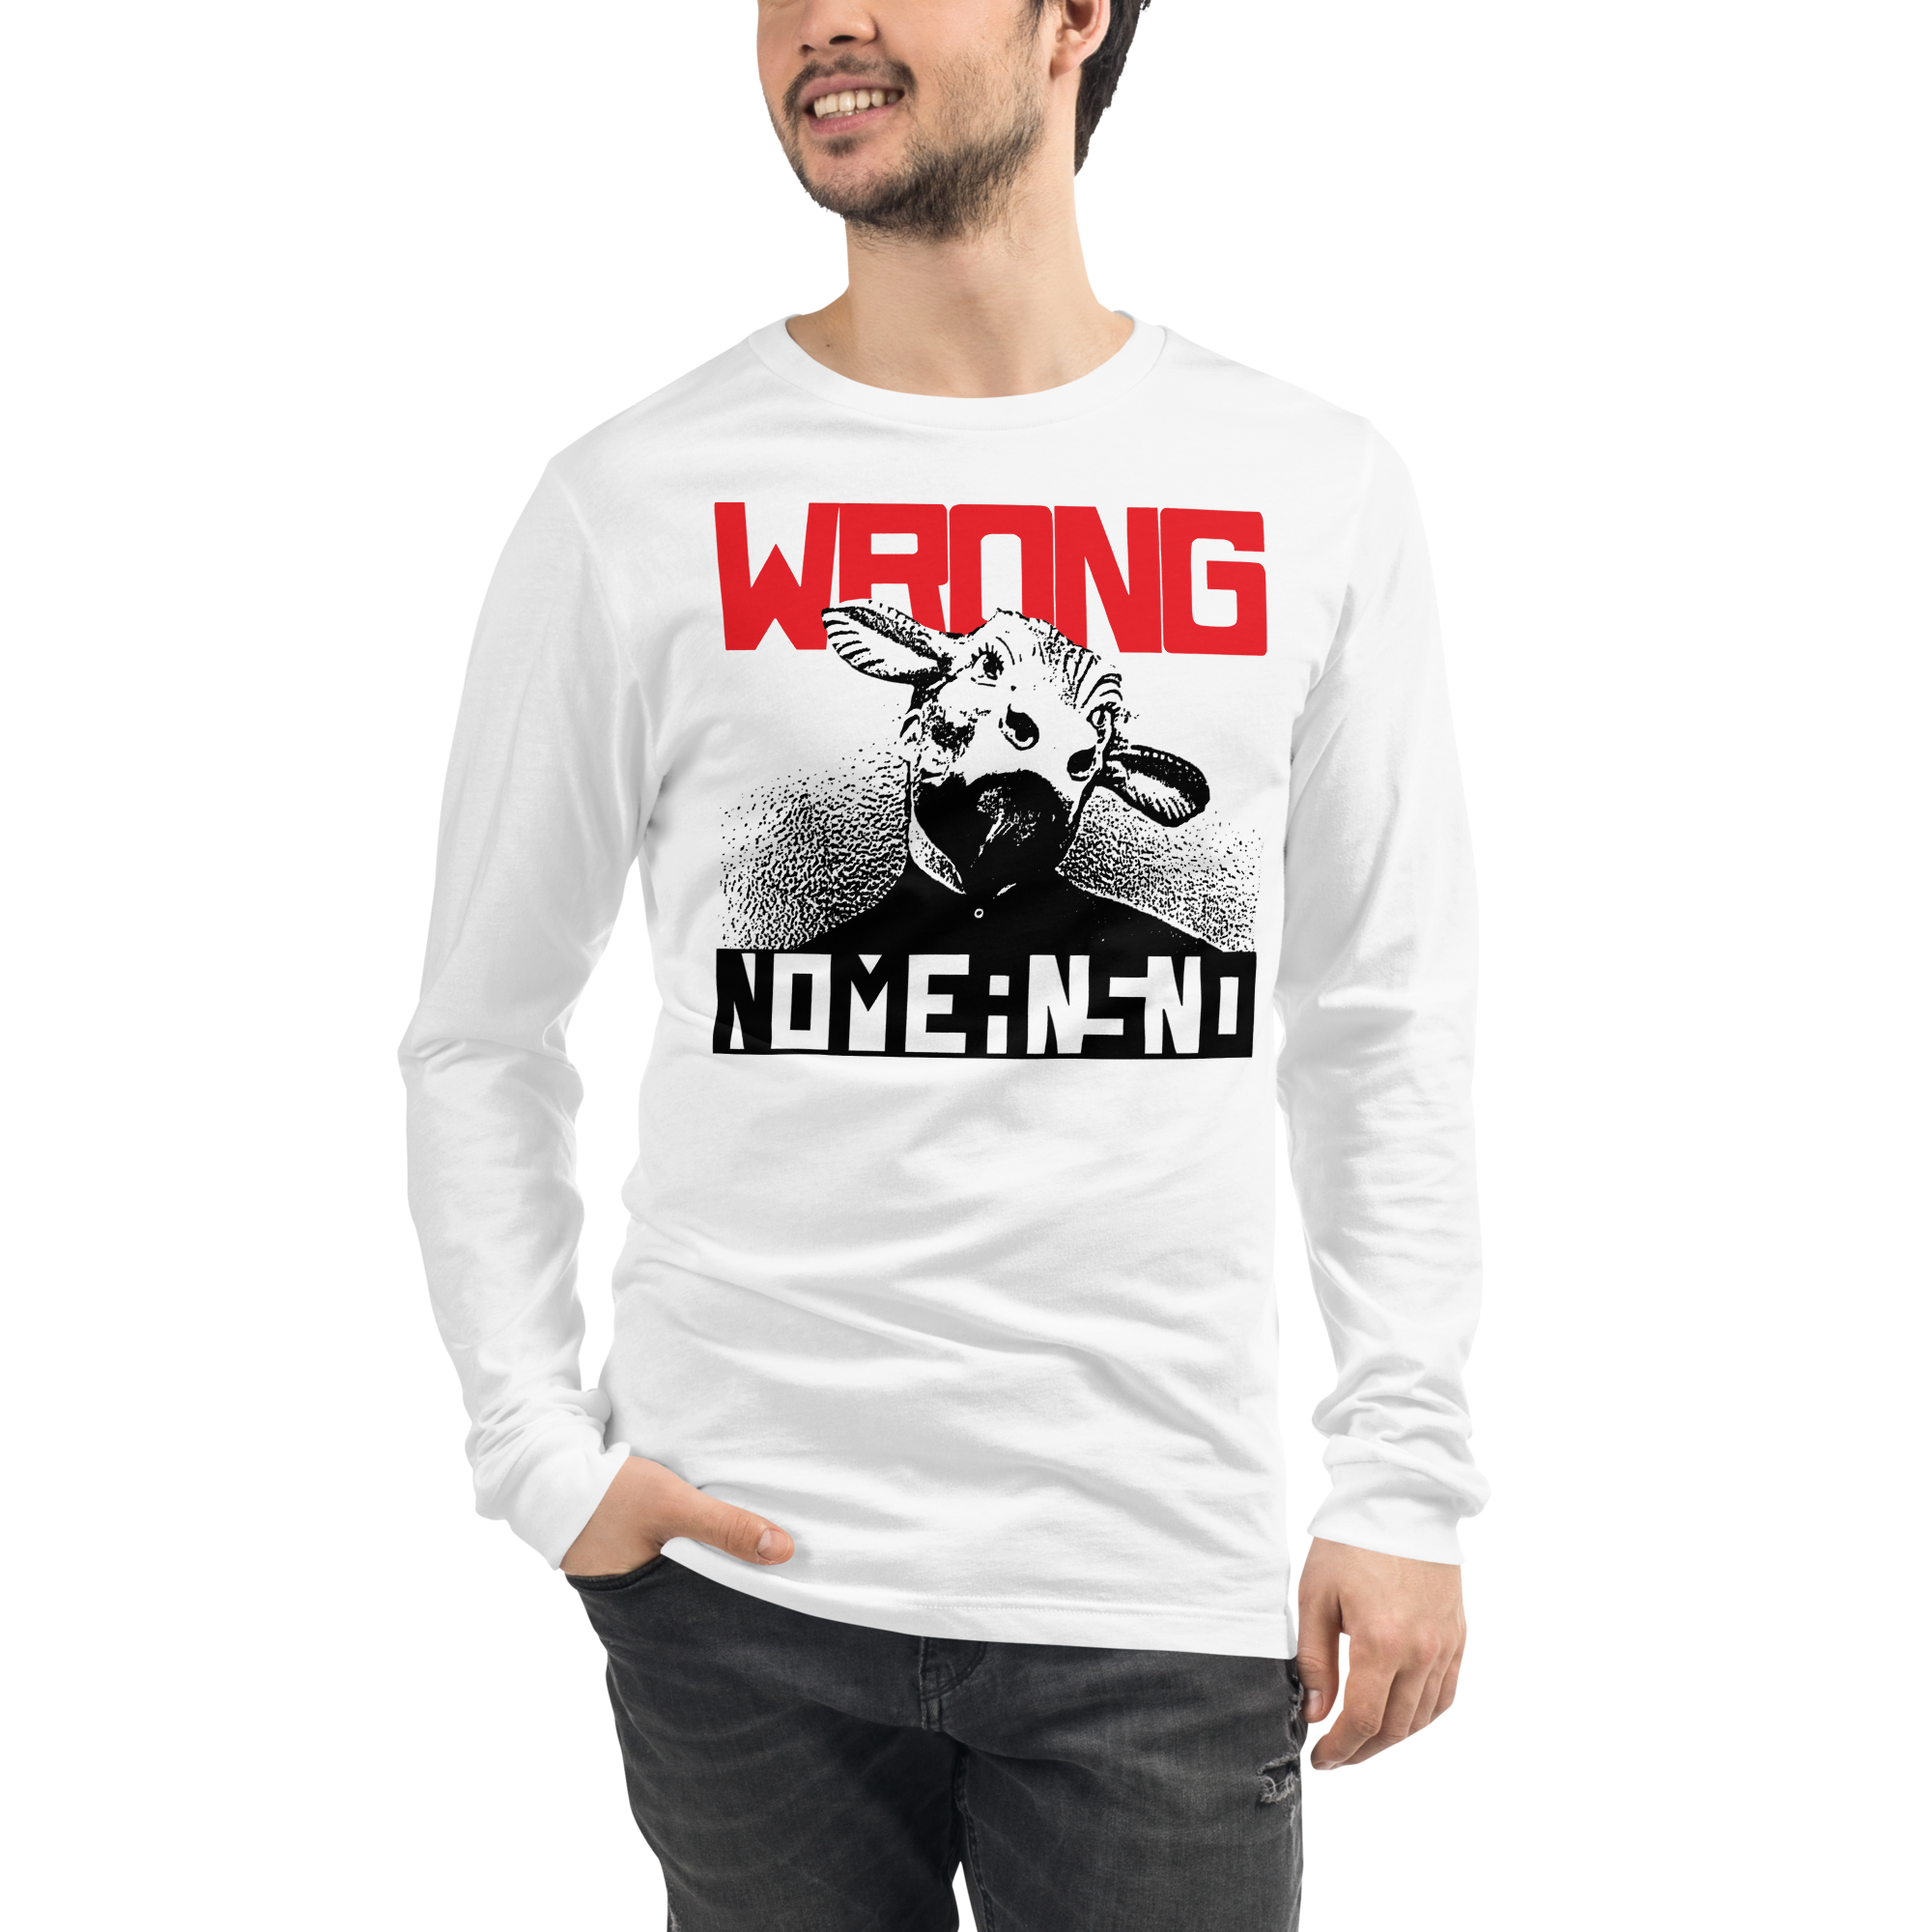 NOMEANSNO "Wrong" White Long Sleeve T-Shirt